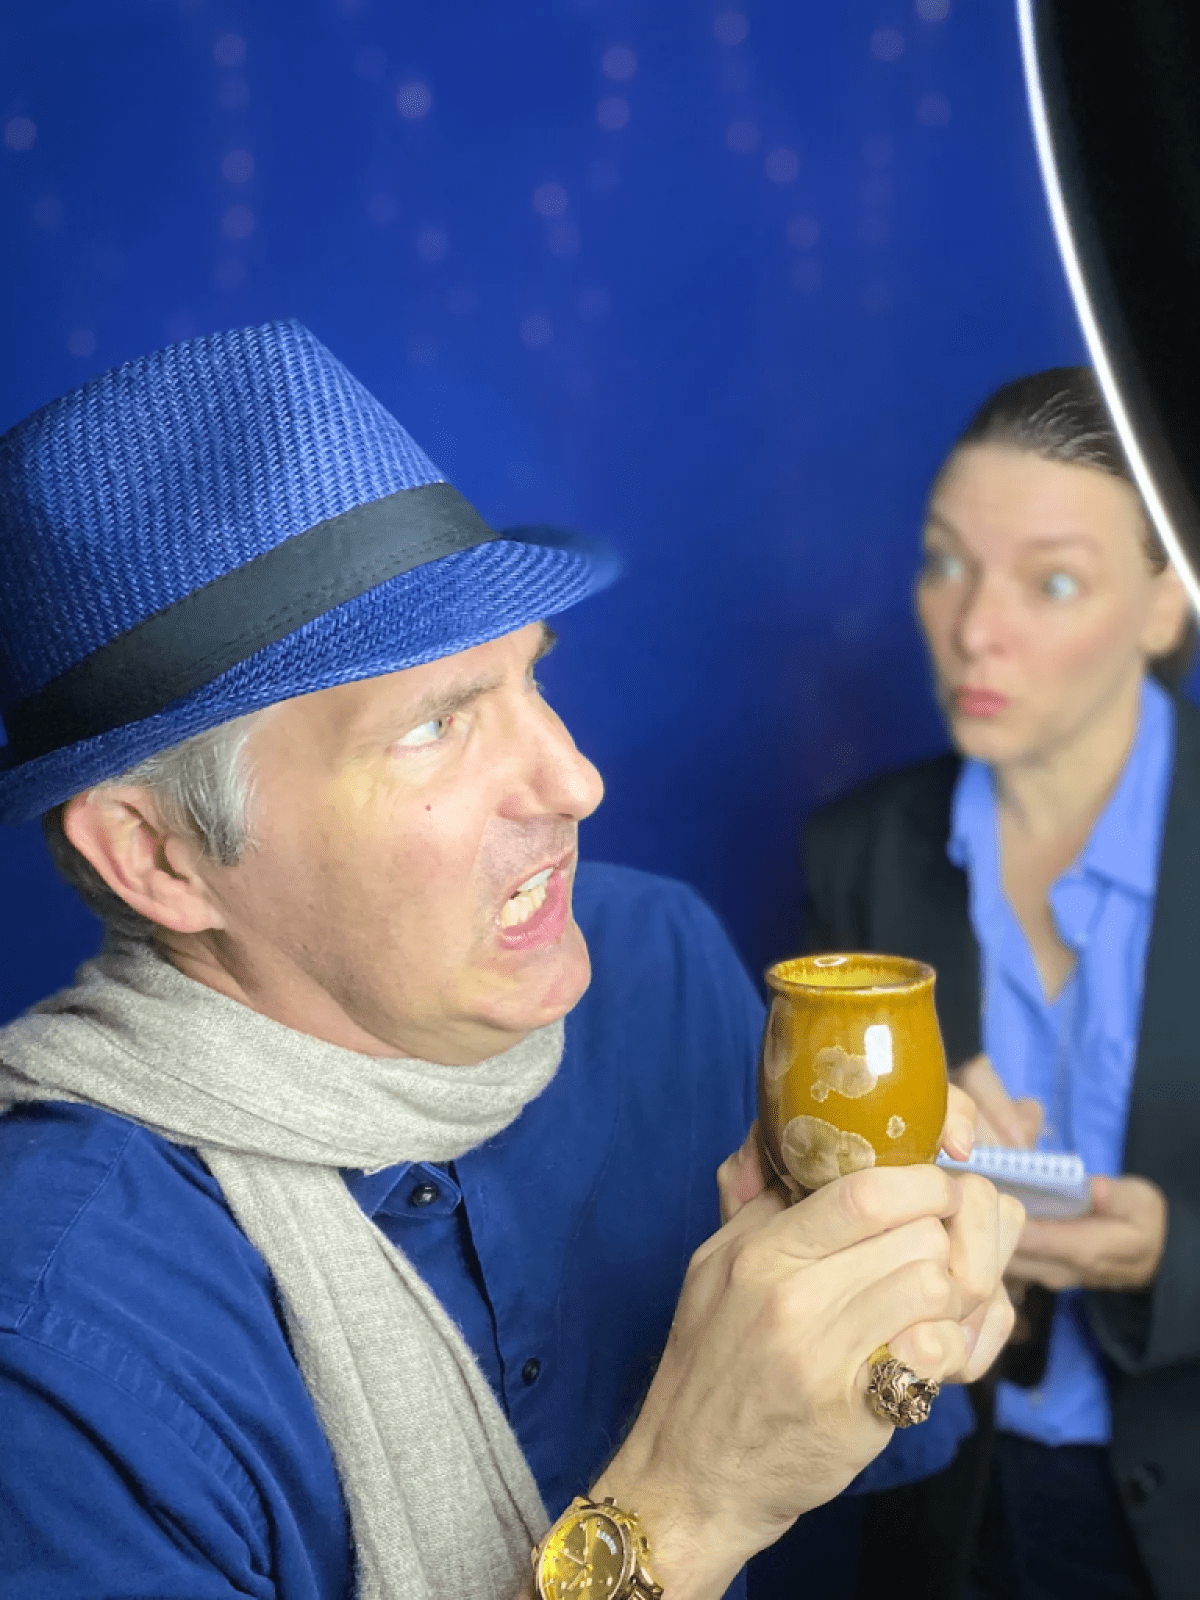 Man making a face at a woman whilst holding onto an object